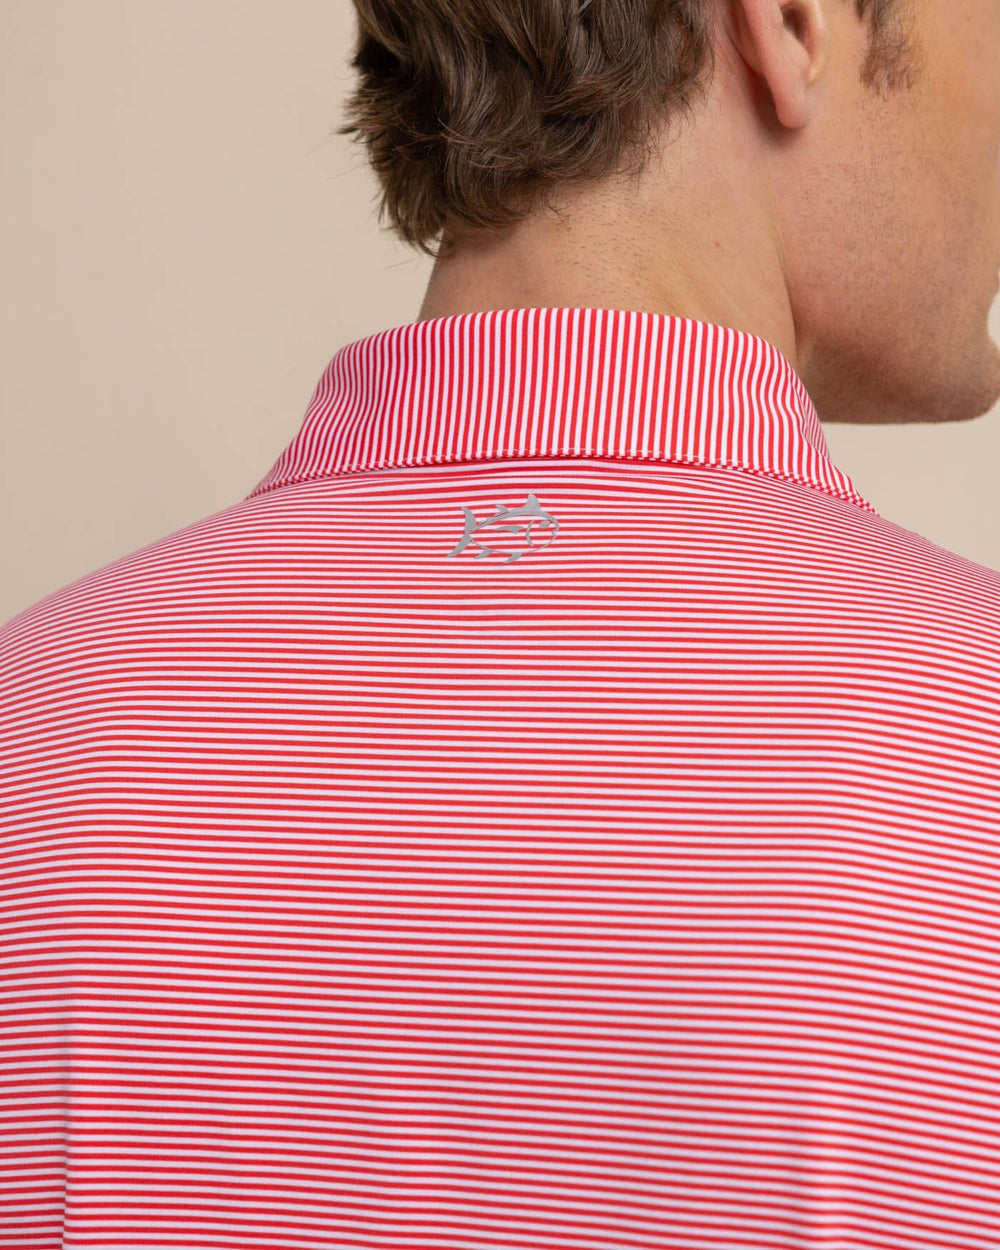 The detail view of the Southern Tide brrr-eeze-meadowbrook-stripe-polo by Southern Tide - Teaberry Pink